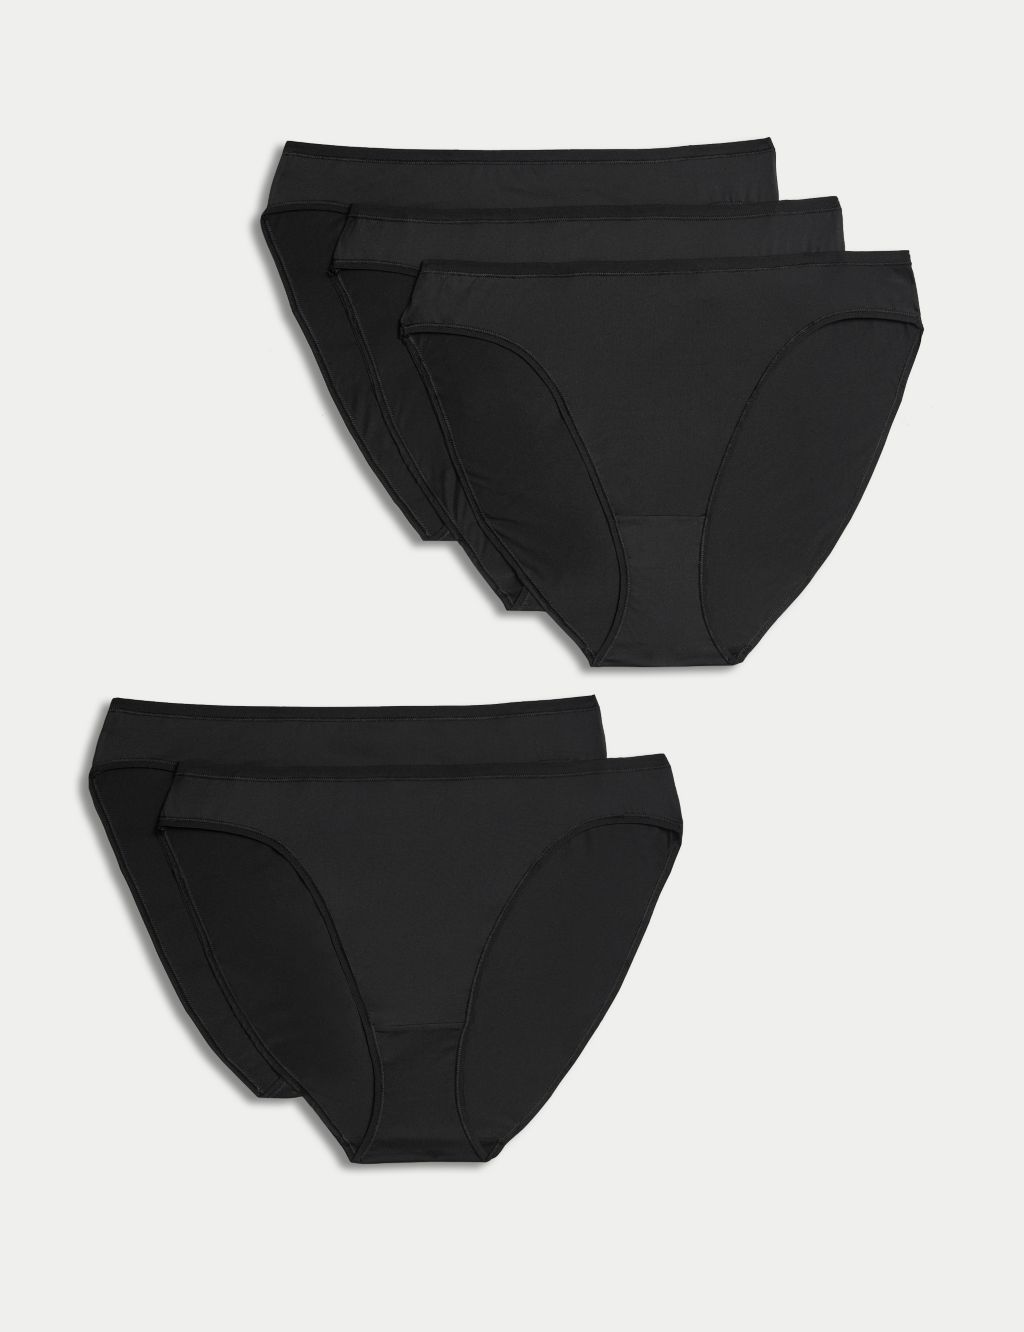 Jual Marks & Spencer 5 Pack No Vpl Microfibre High Leg Knickers